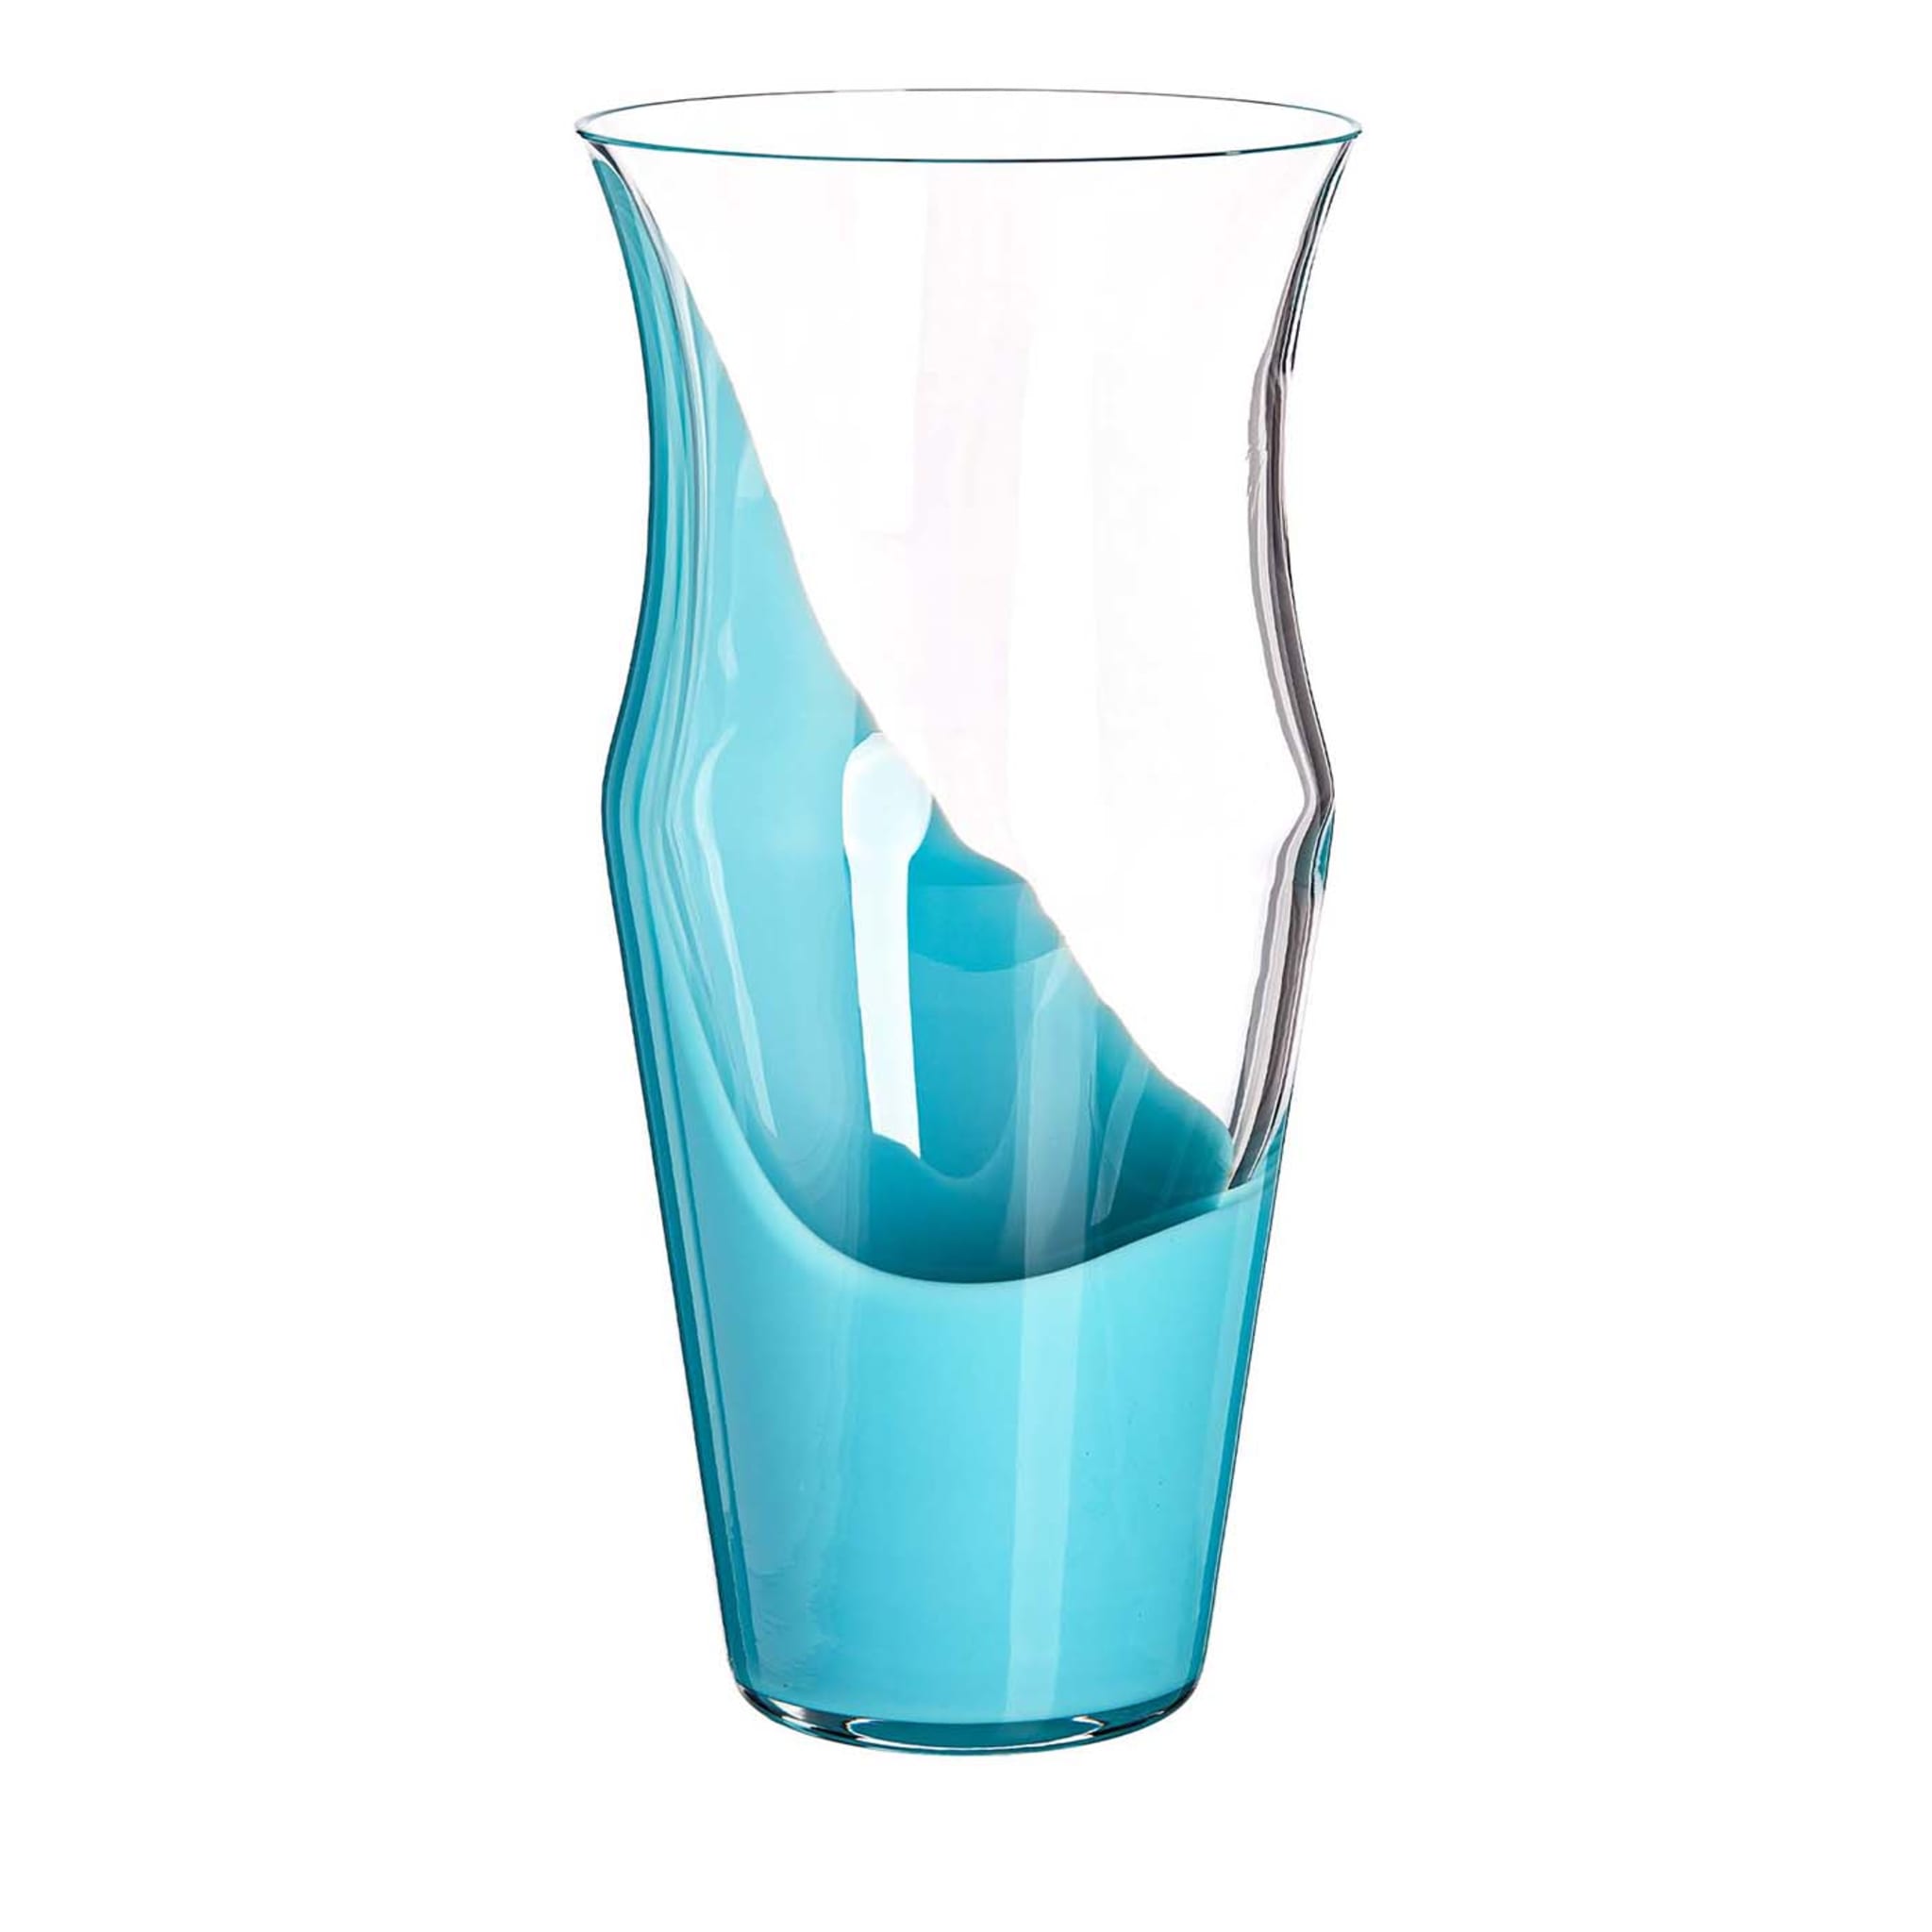 Monocromo Teal and Transparent Vase by Carlo Moretti - Main view